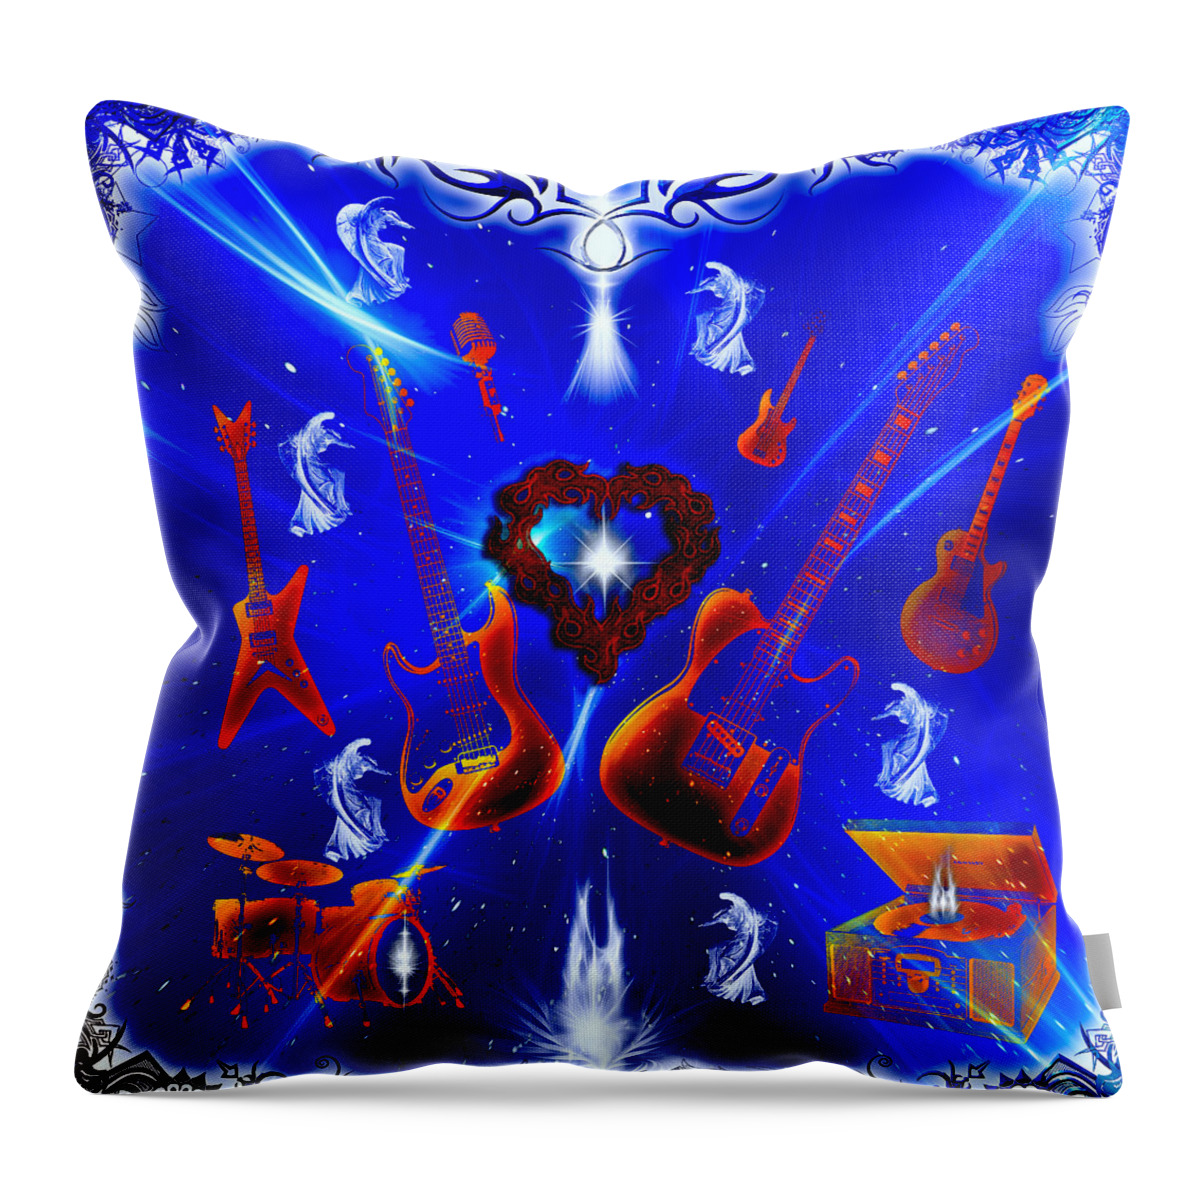 Rock And Roll Heaven Throw Pillow featuring the digital art Rock And Roll Heaven by Michael Damiani